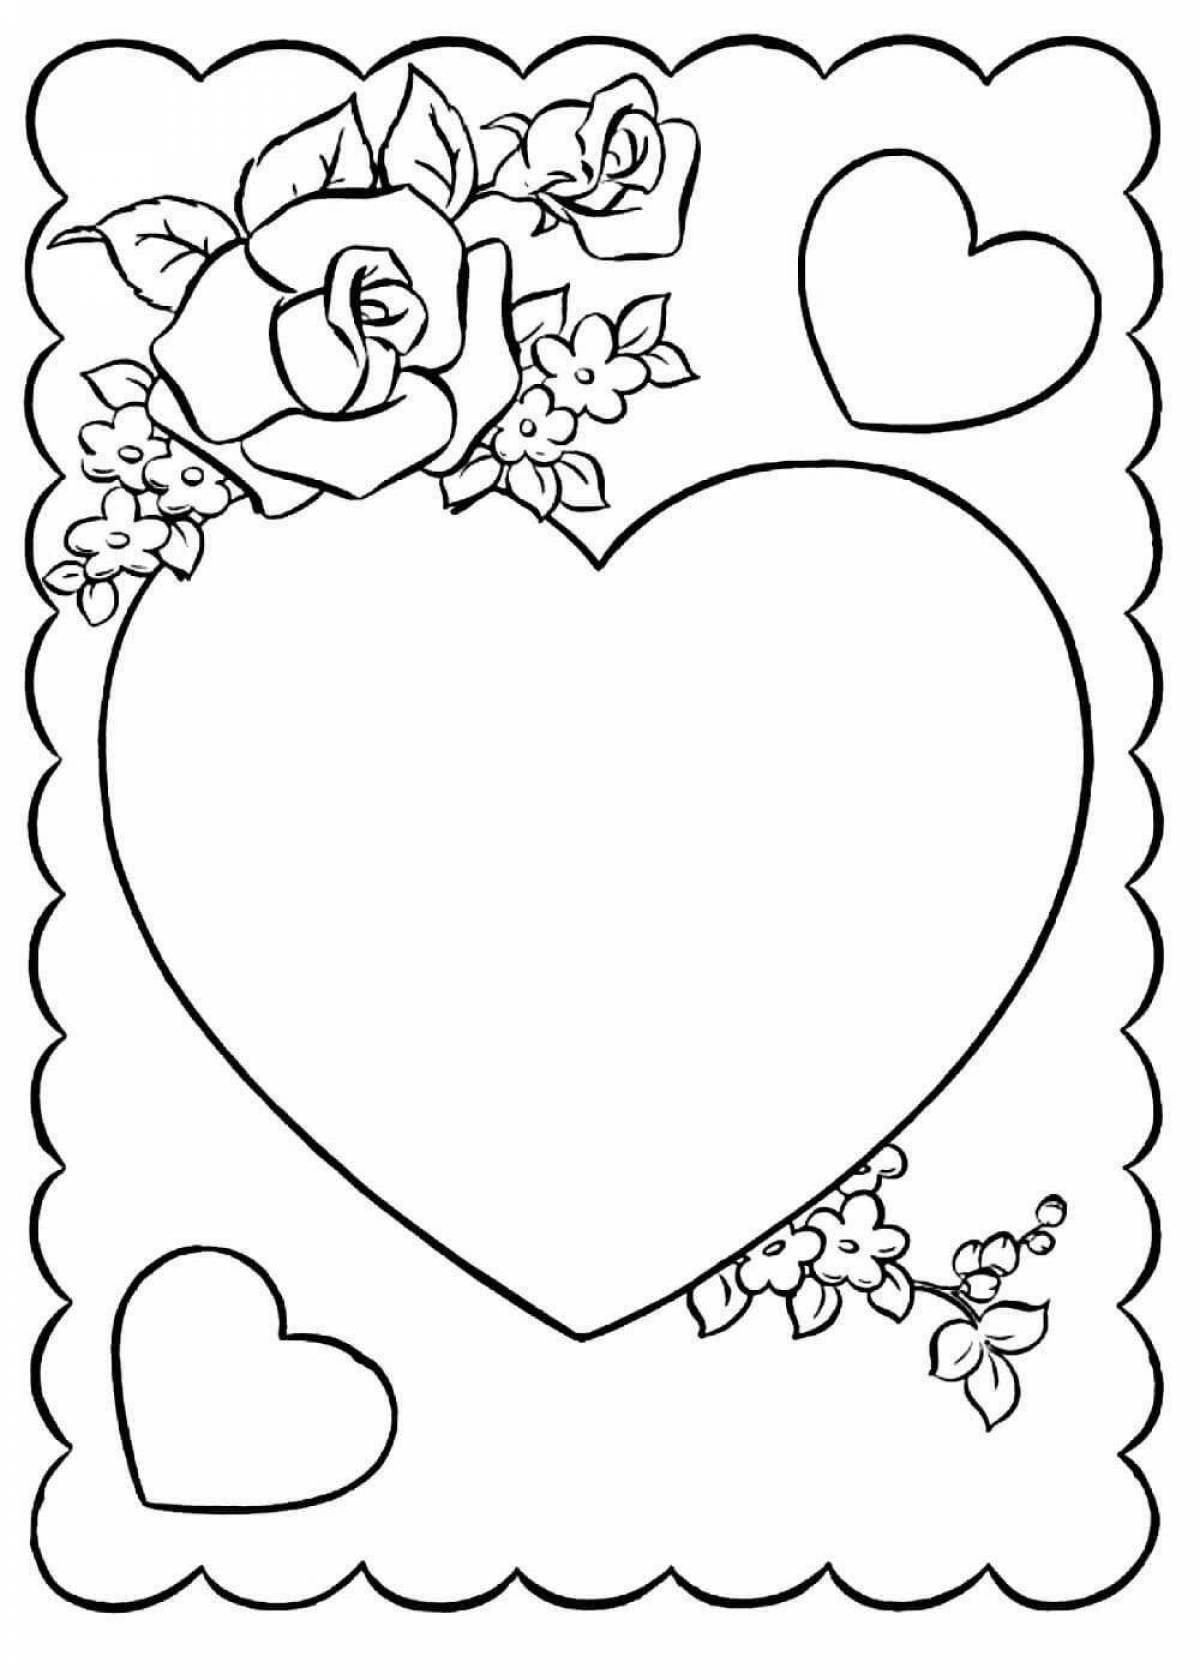 Colorful heart coloring for mom